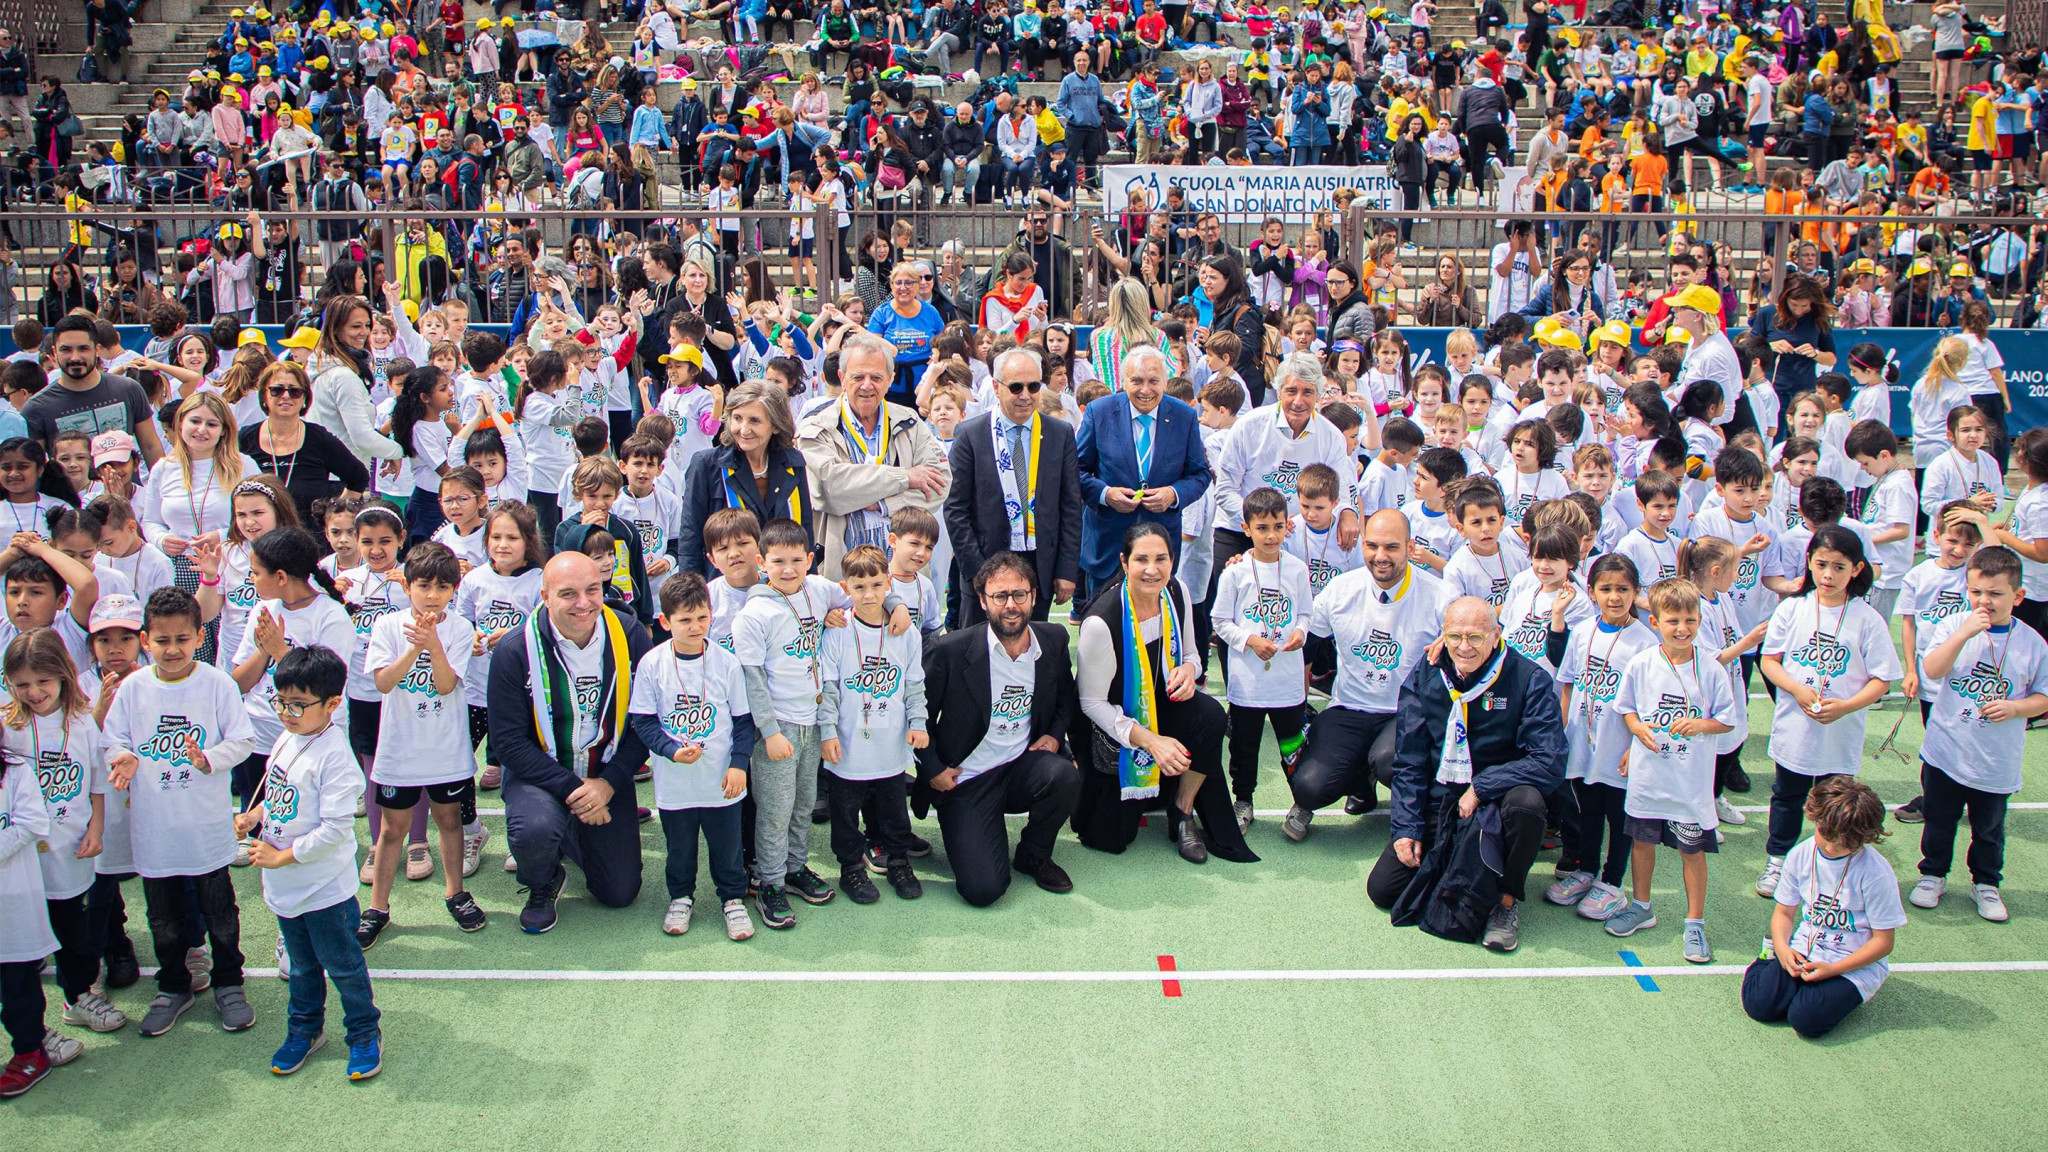 Thousands of youngsters helped celebrate the 1,000-day milestone to Milan Cortina 2026 ©Milan Cortina 2026